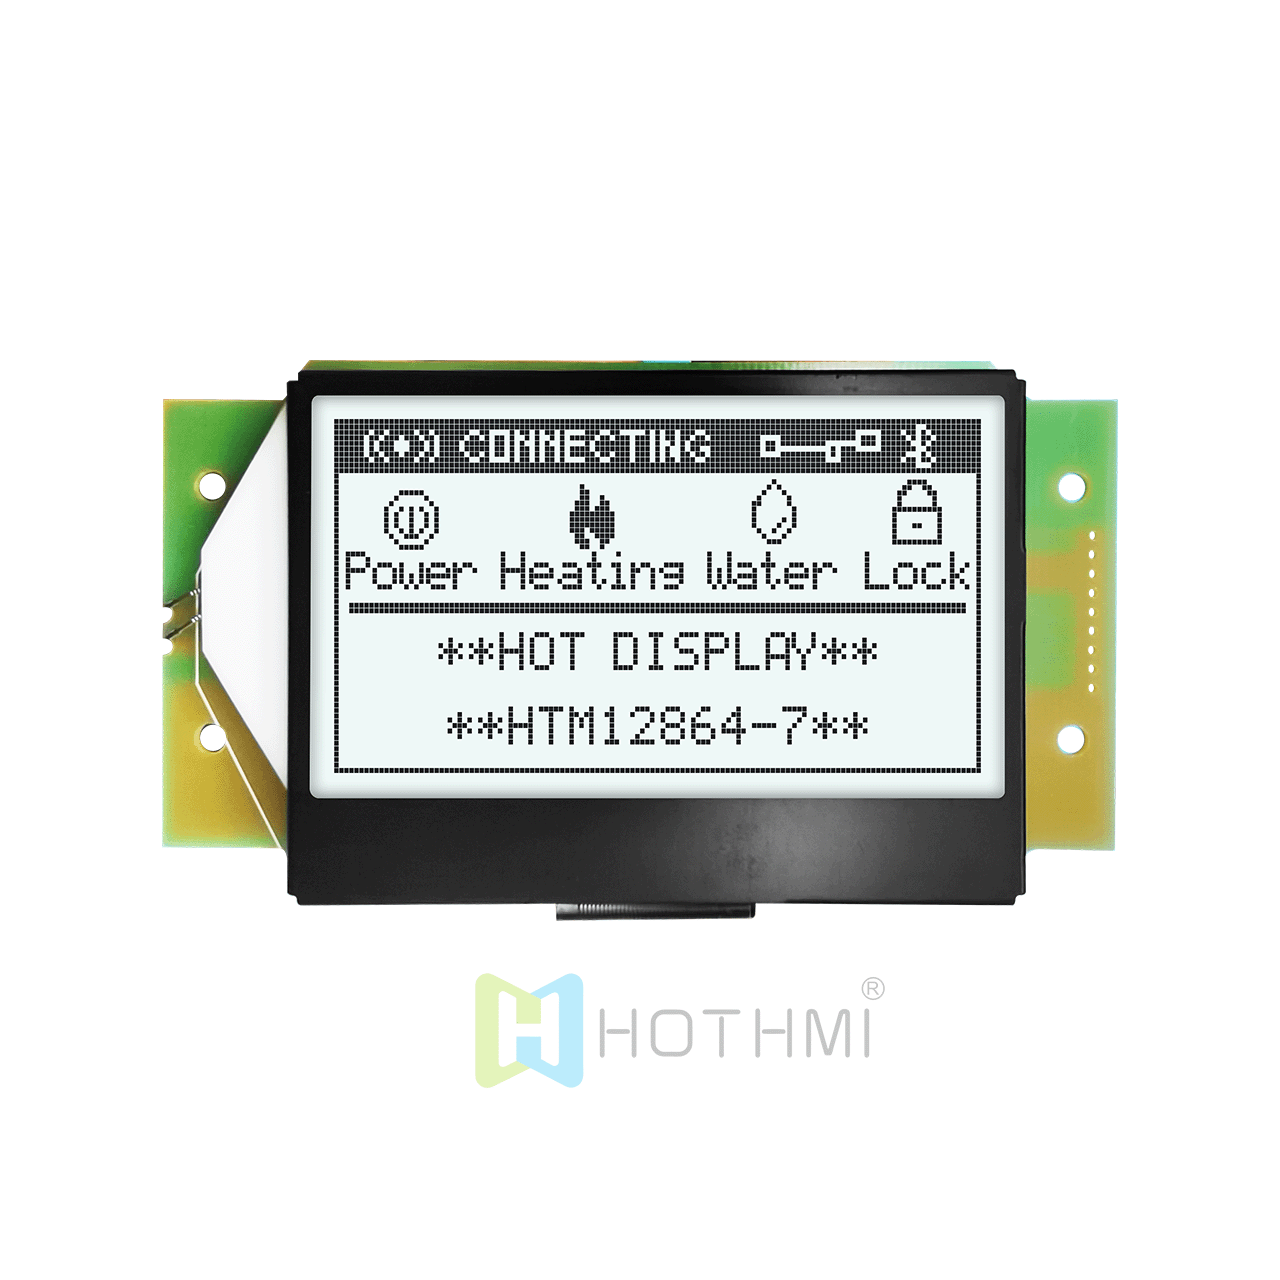 3 inch low cost graphic LCD module | 12864 graphic display | 128x64 graphic LCD LCD module